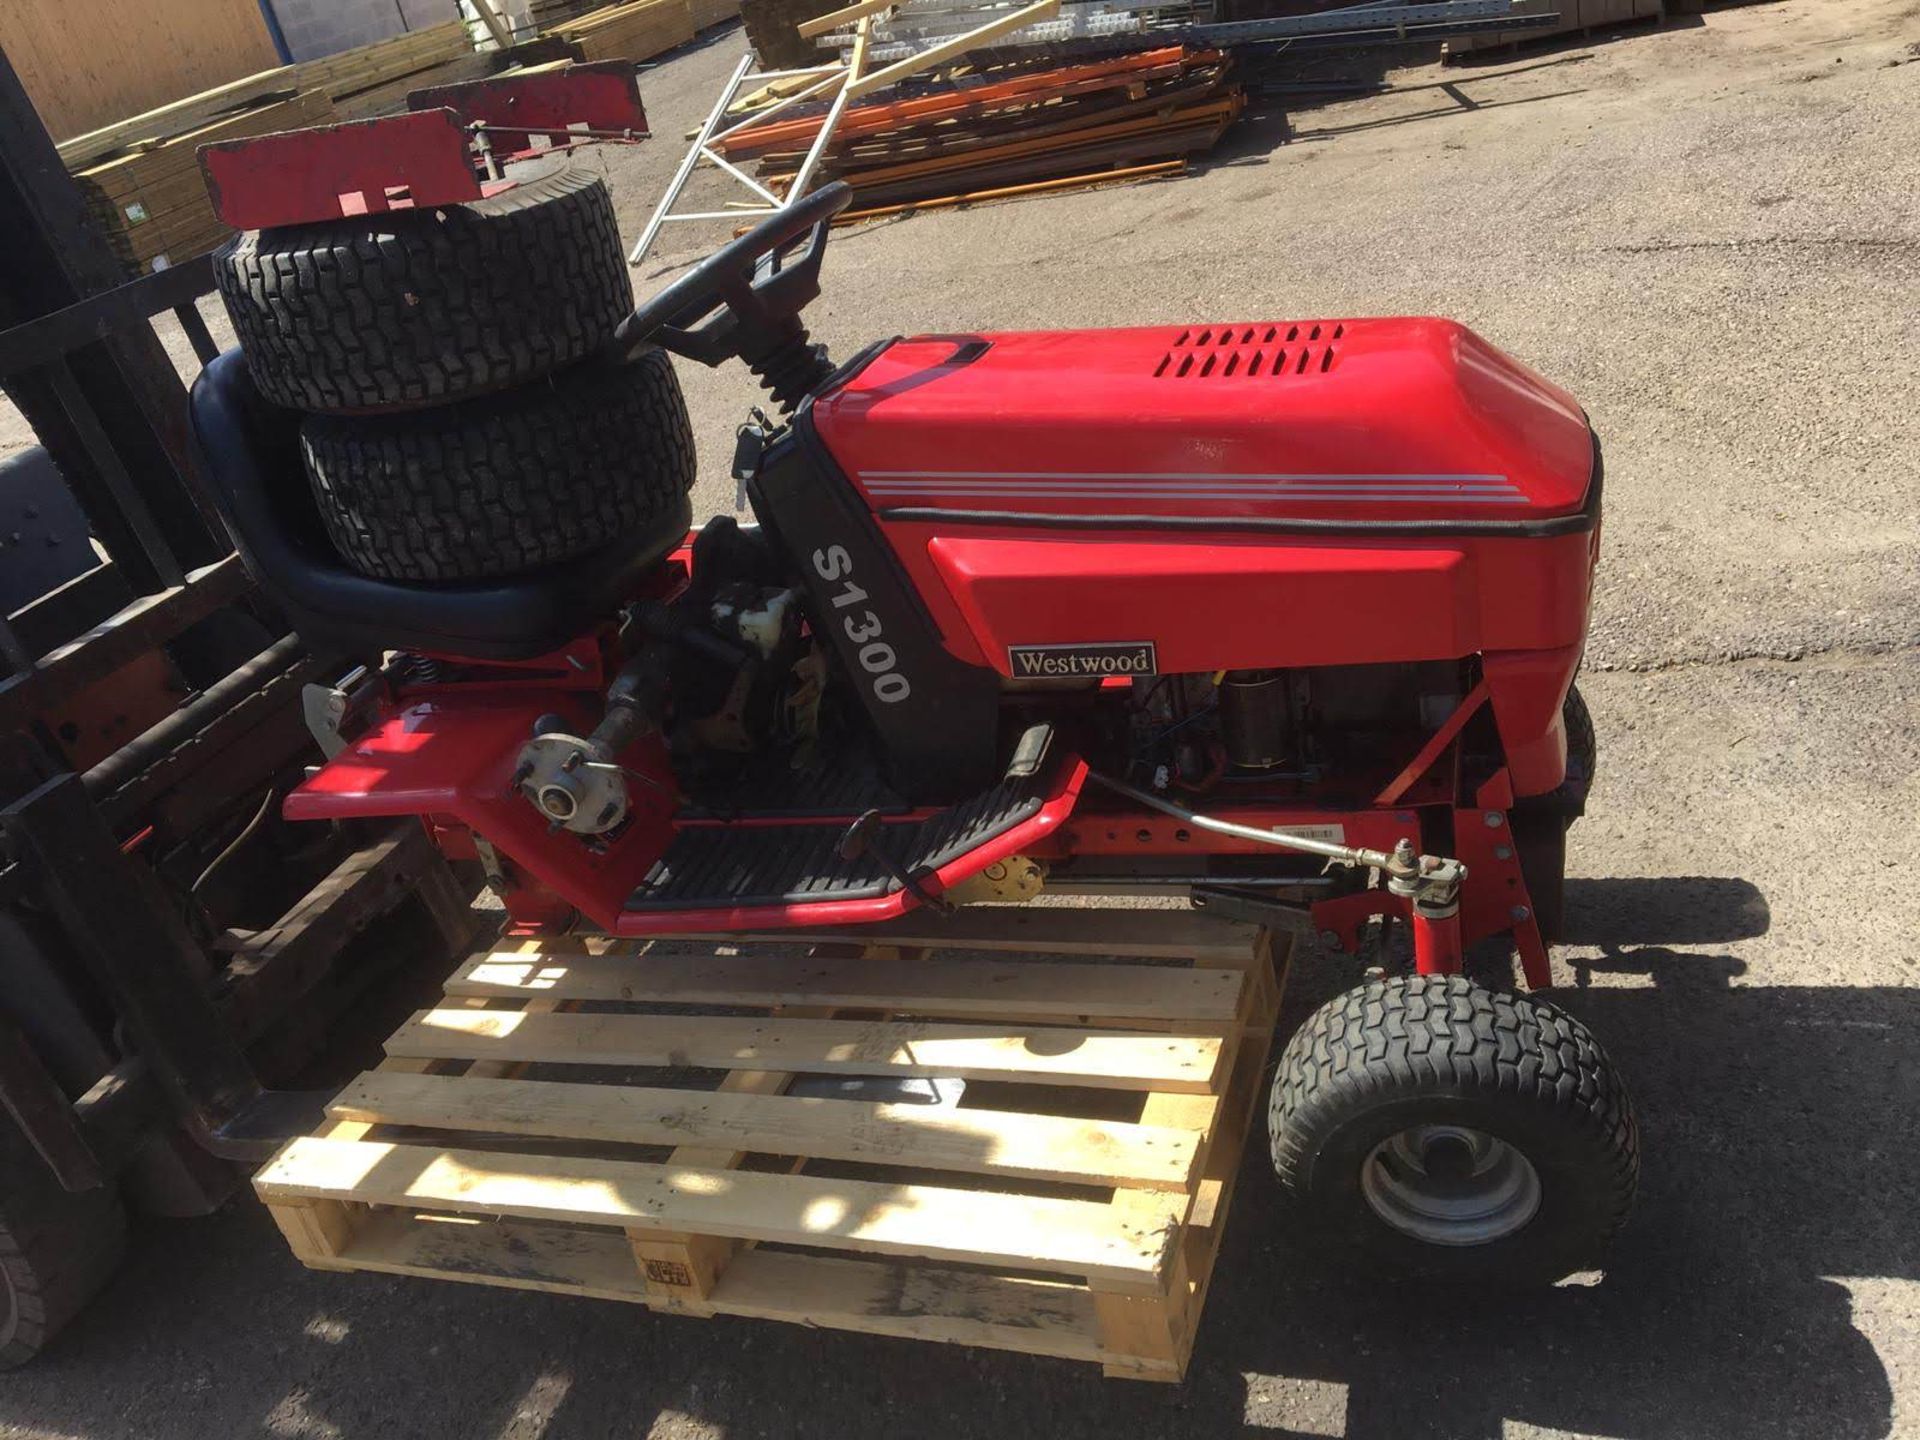 WESTWOOD S1300 RIDE ON LAWN MOWER, C/W DECK, WHEELS & GRASS COLLECTOR, SELLING AS SPARES / REPAIRS - Image 6 of 14